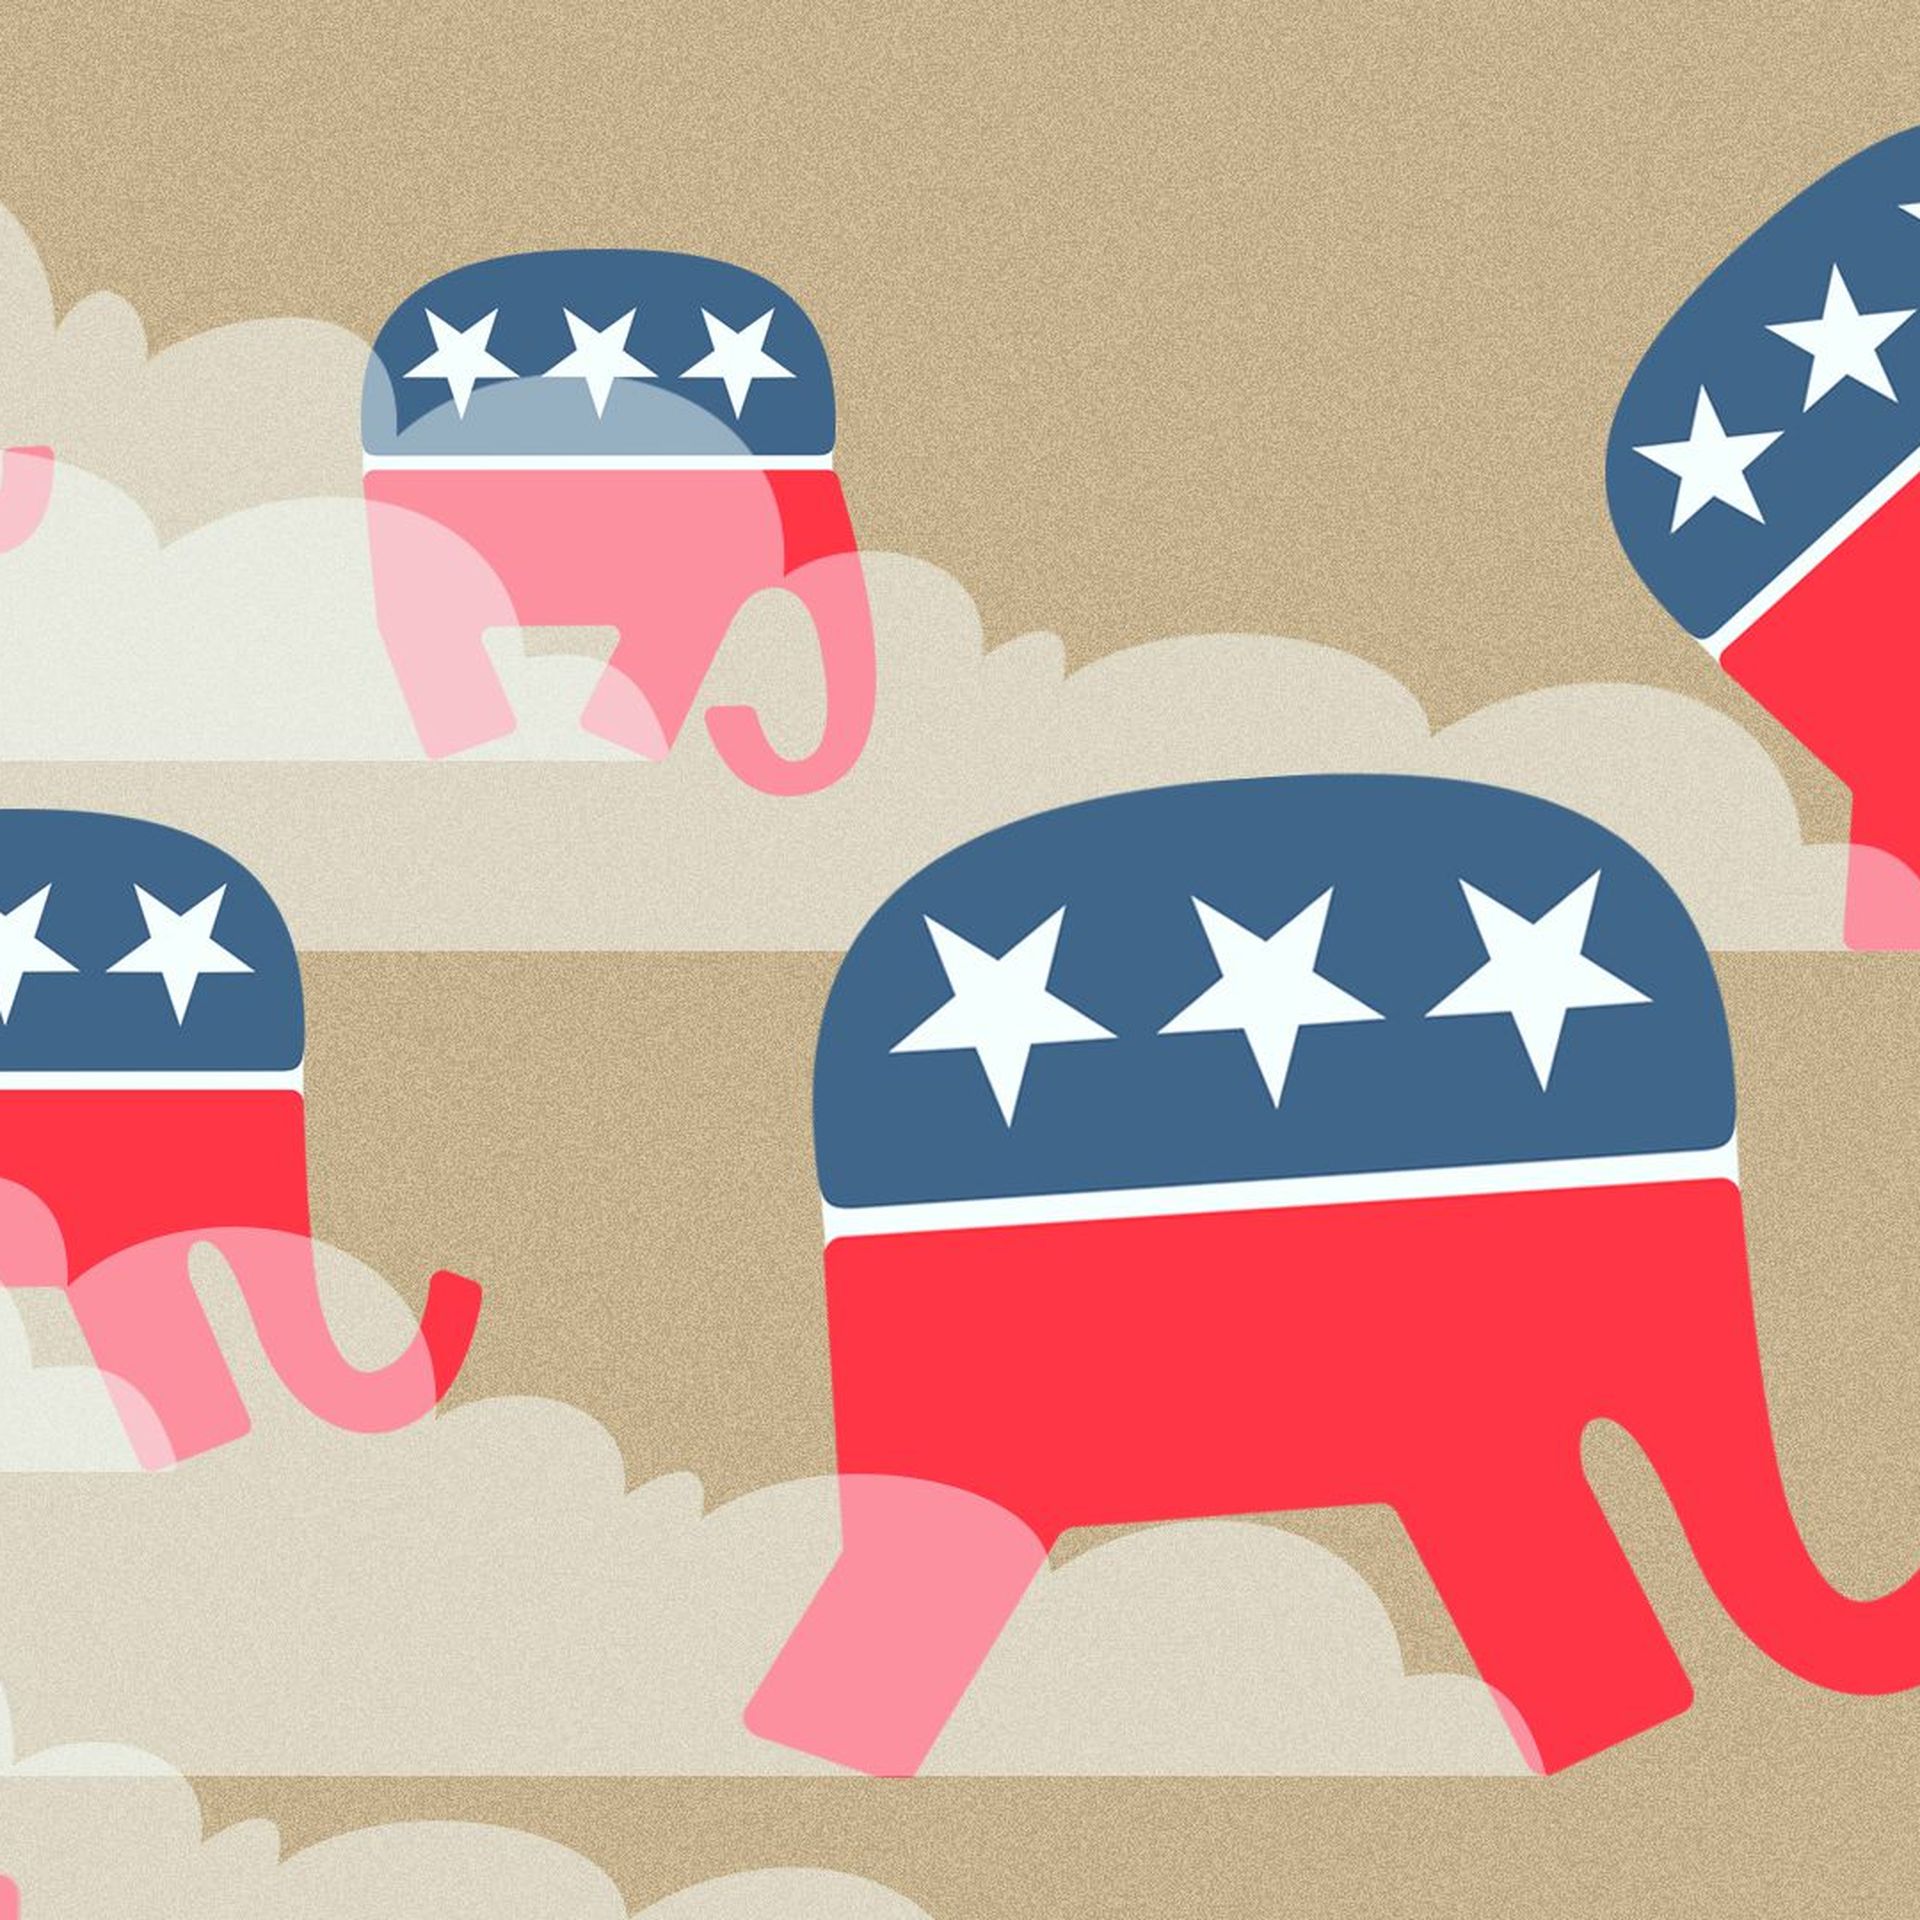 Illustration of several versions of the elephant from the Republican Party logo stampeding and kicking up dust.